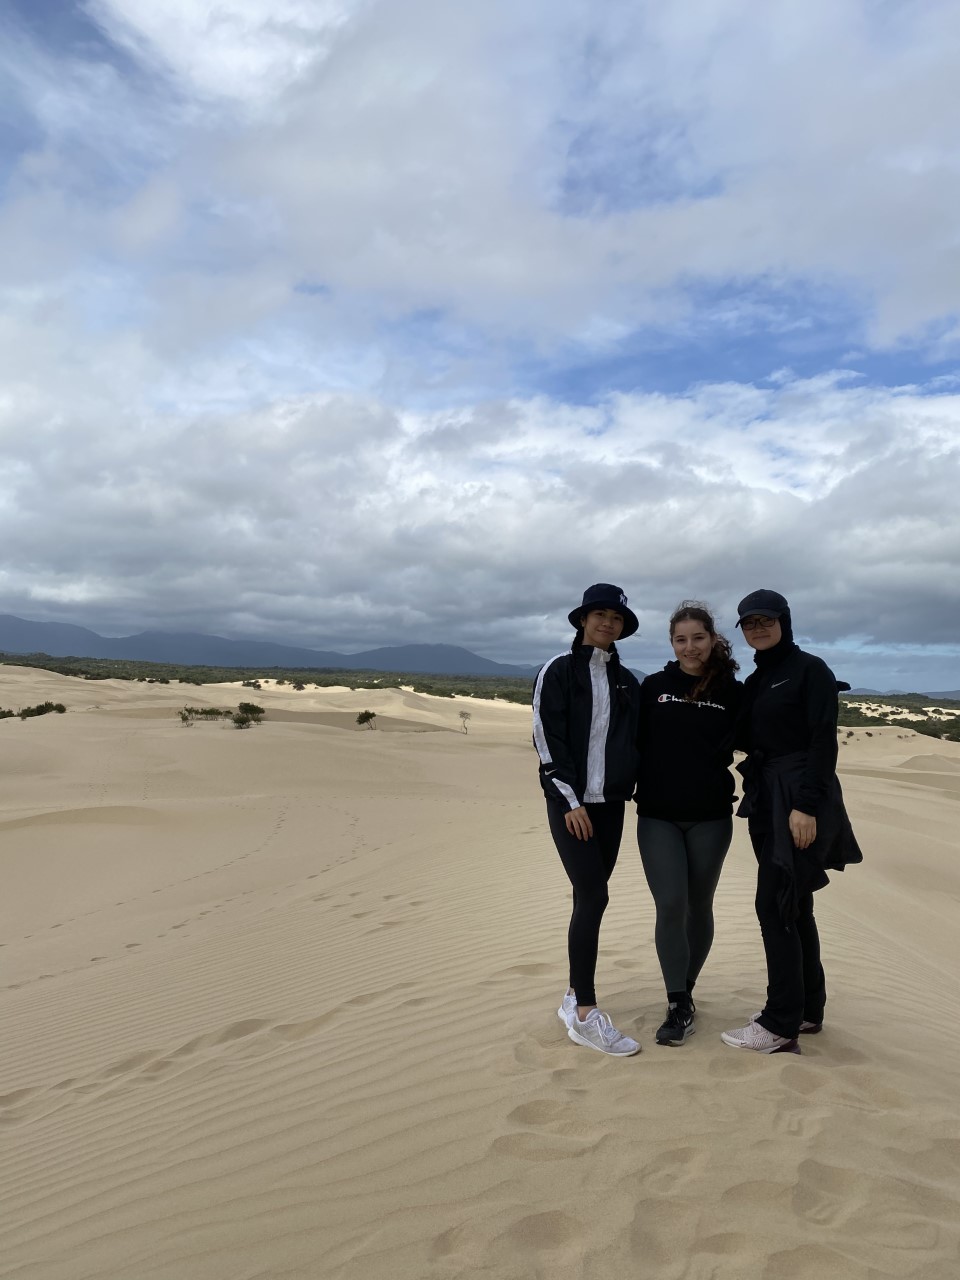 Final year Bachelor of Oral Health and Dentistry students pose for a photo in the sand dunes at Wilsons Promontory National Park